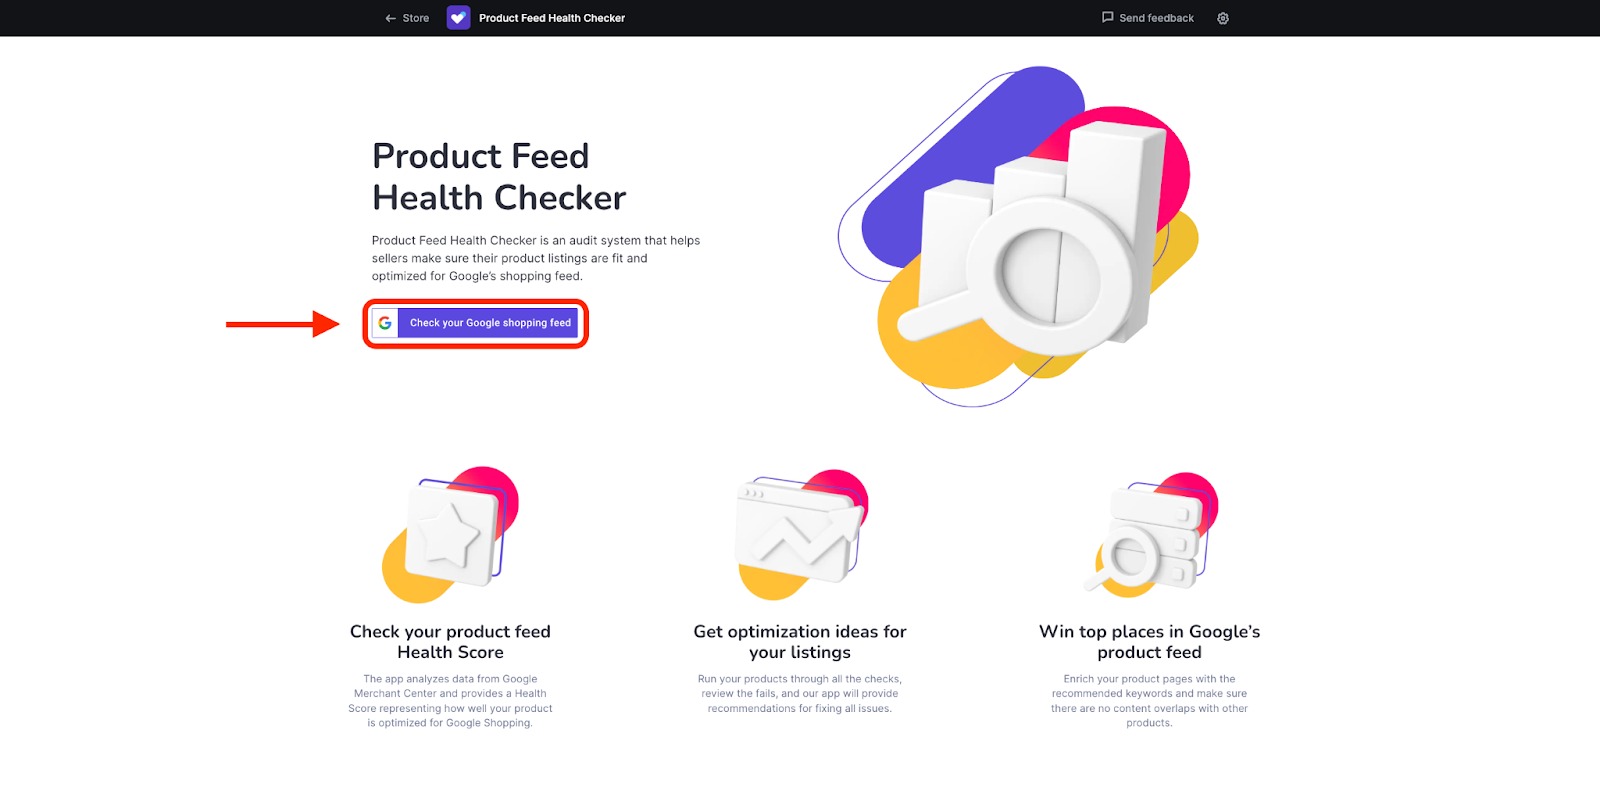 An example of the Product Feed Health Checker home page.